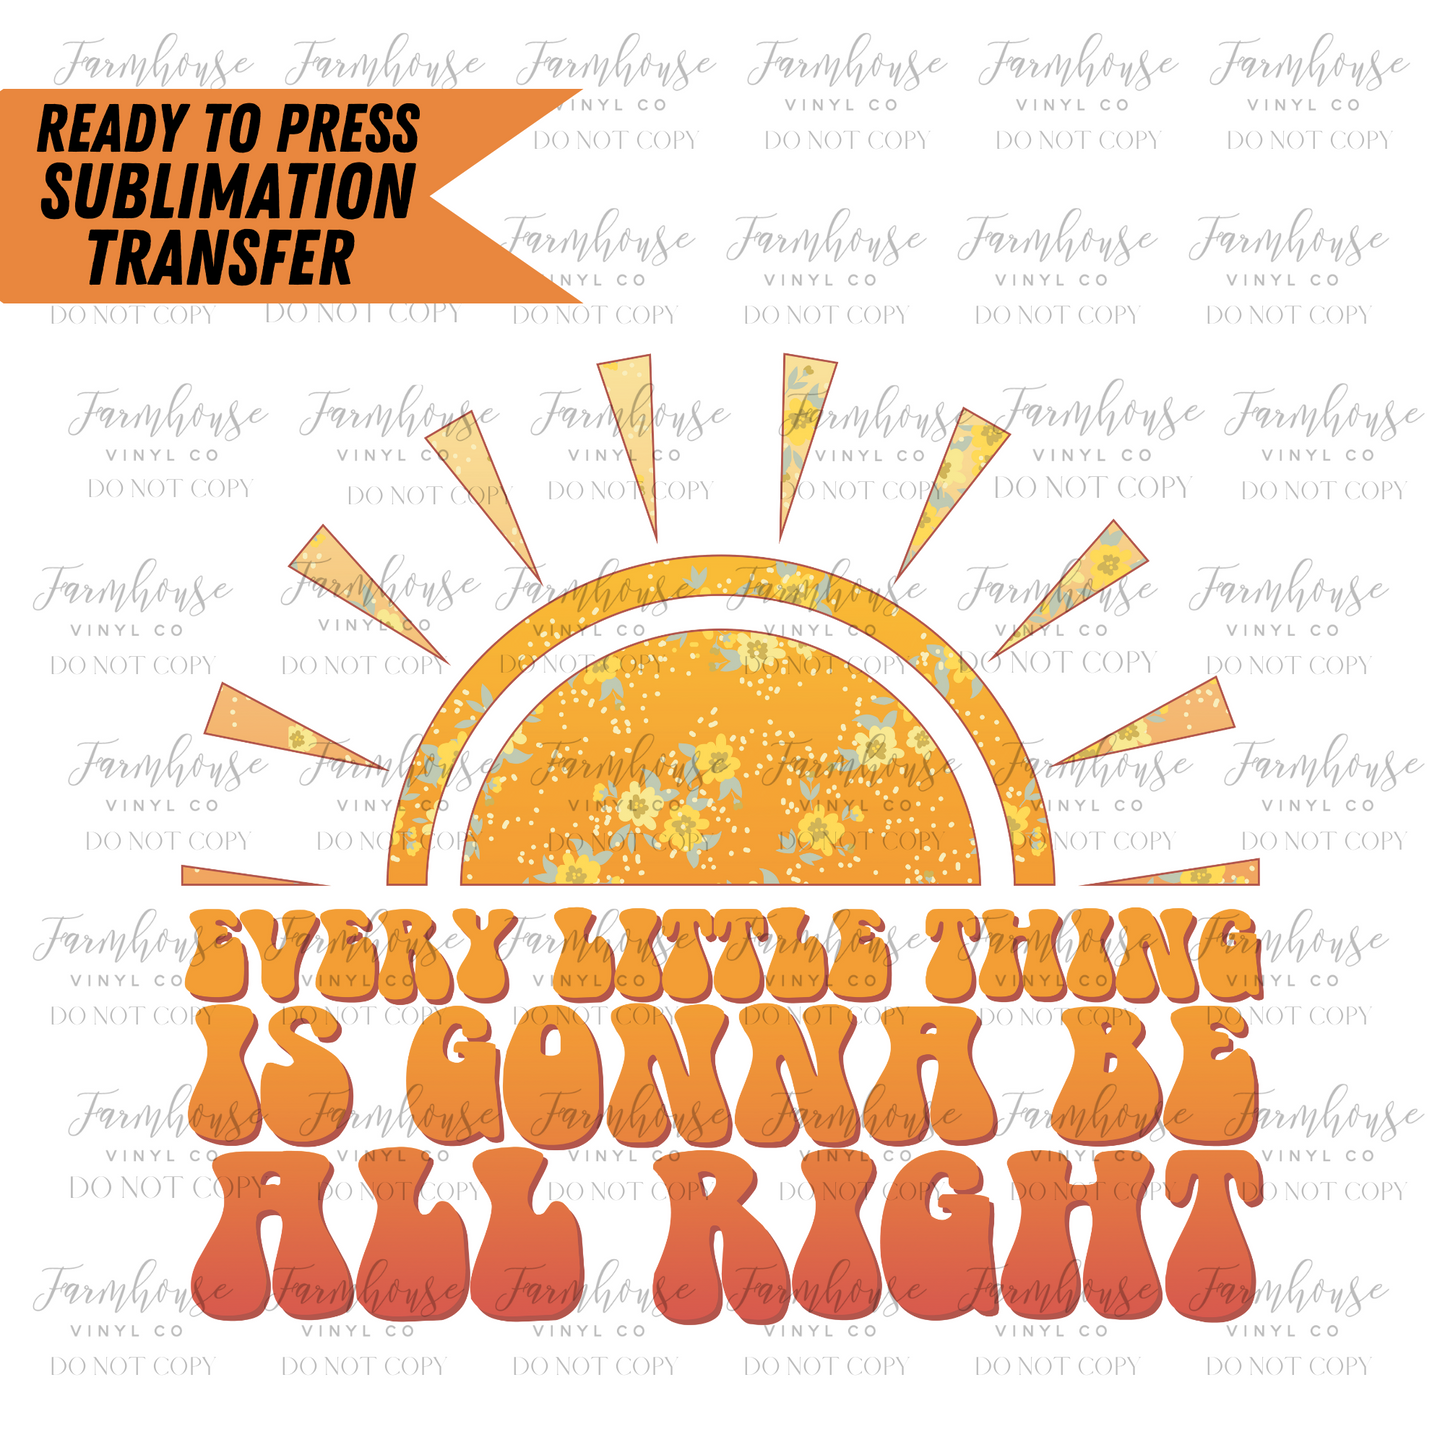 Every Little Thing Is Gonna Be All Right Ready To Press Sublimation Transfer Design - Farmhouse Vinyl Co